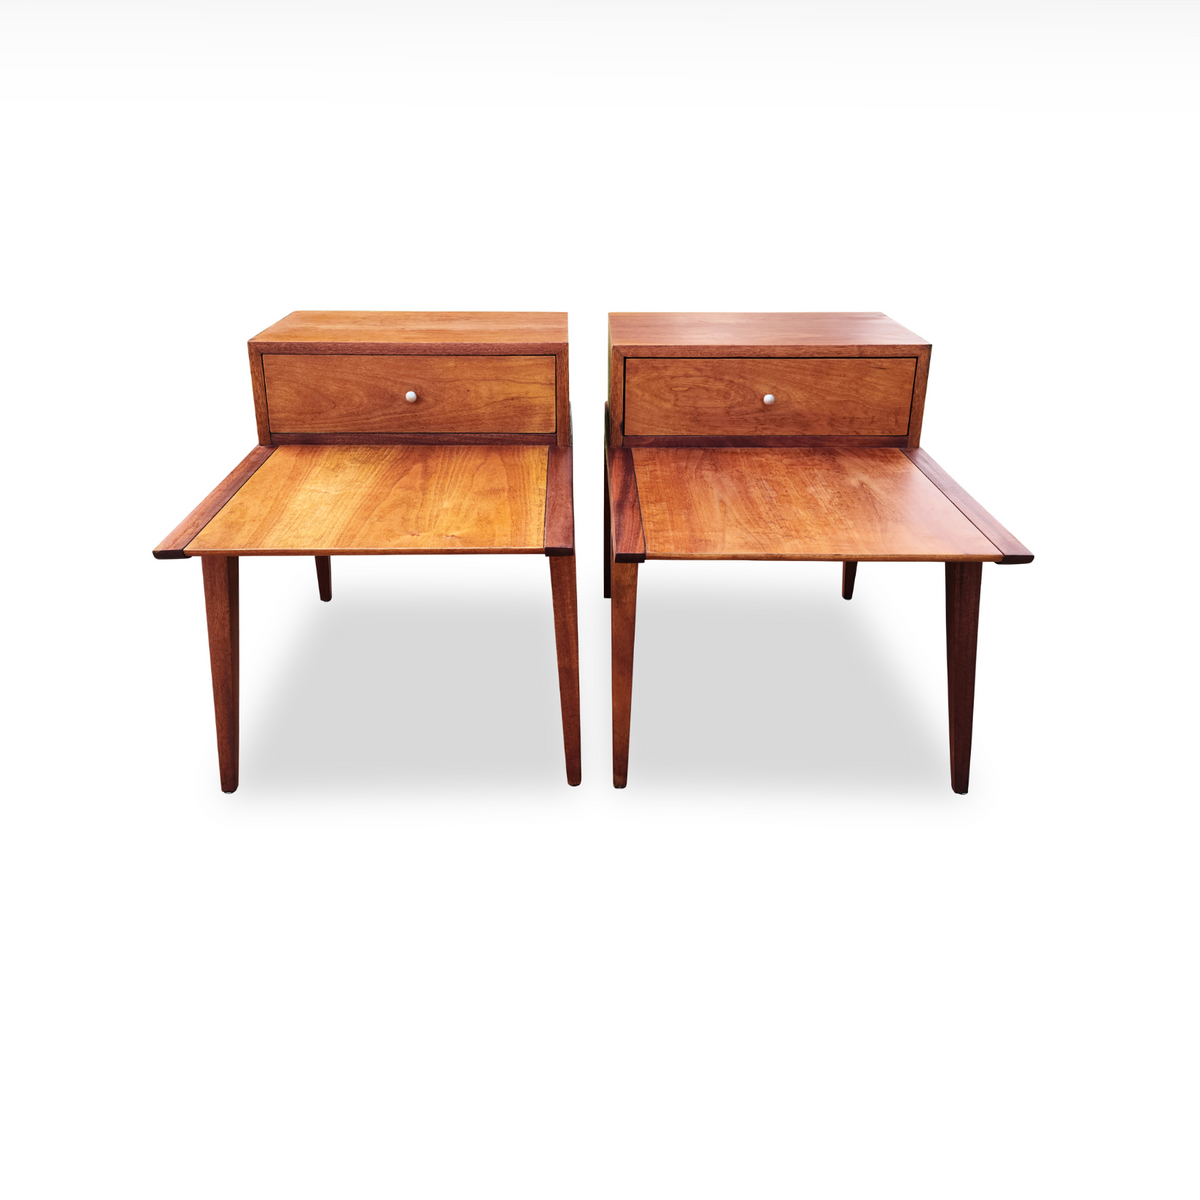 Pair of Cherry Wood End Tables